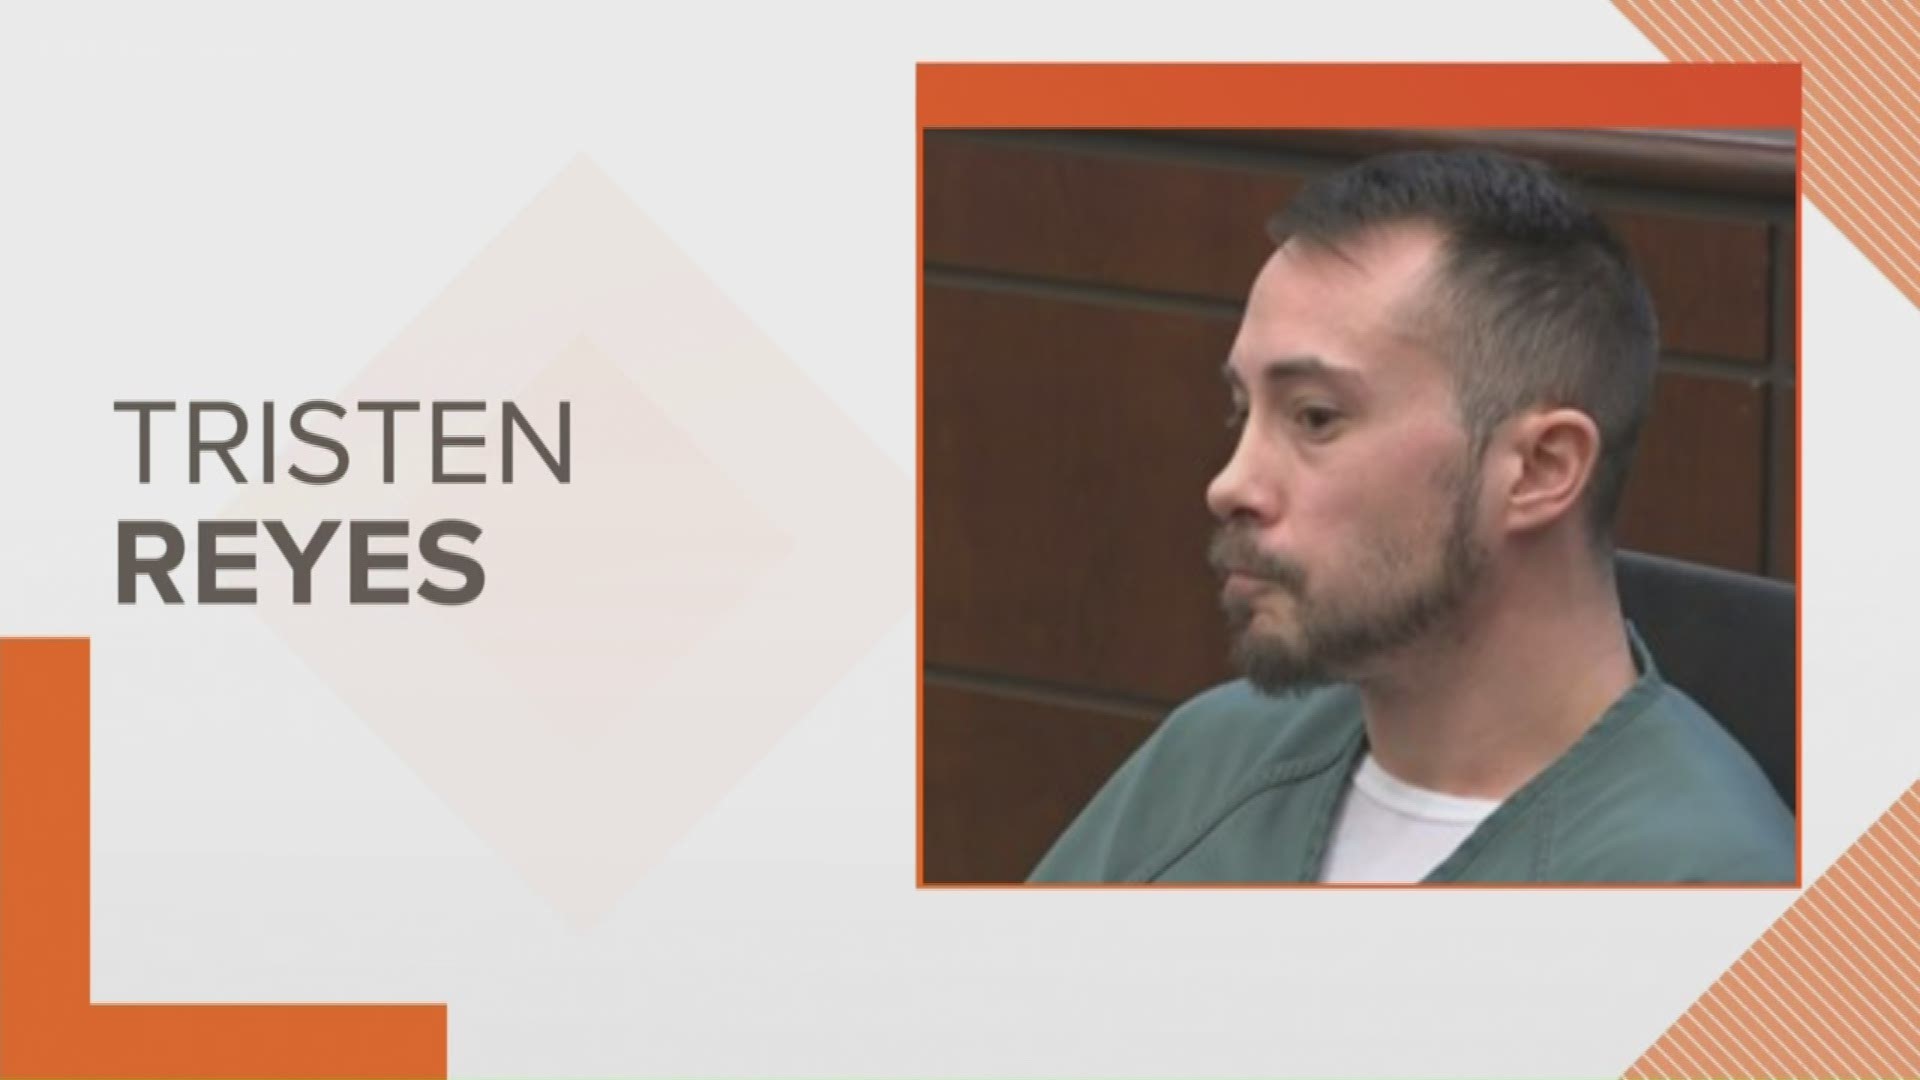 Tristen Reyes was given a minimum sentence of 3 years in prison for sexually assaulting a Hope College student in 2018.